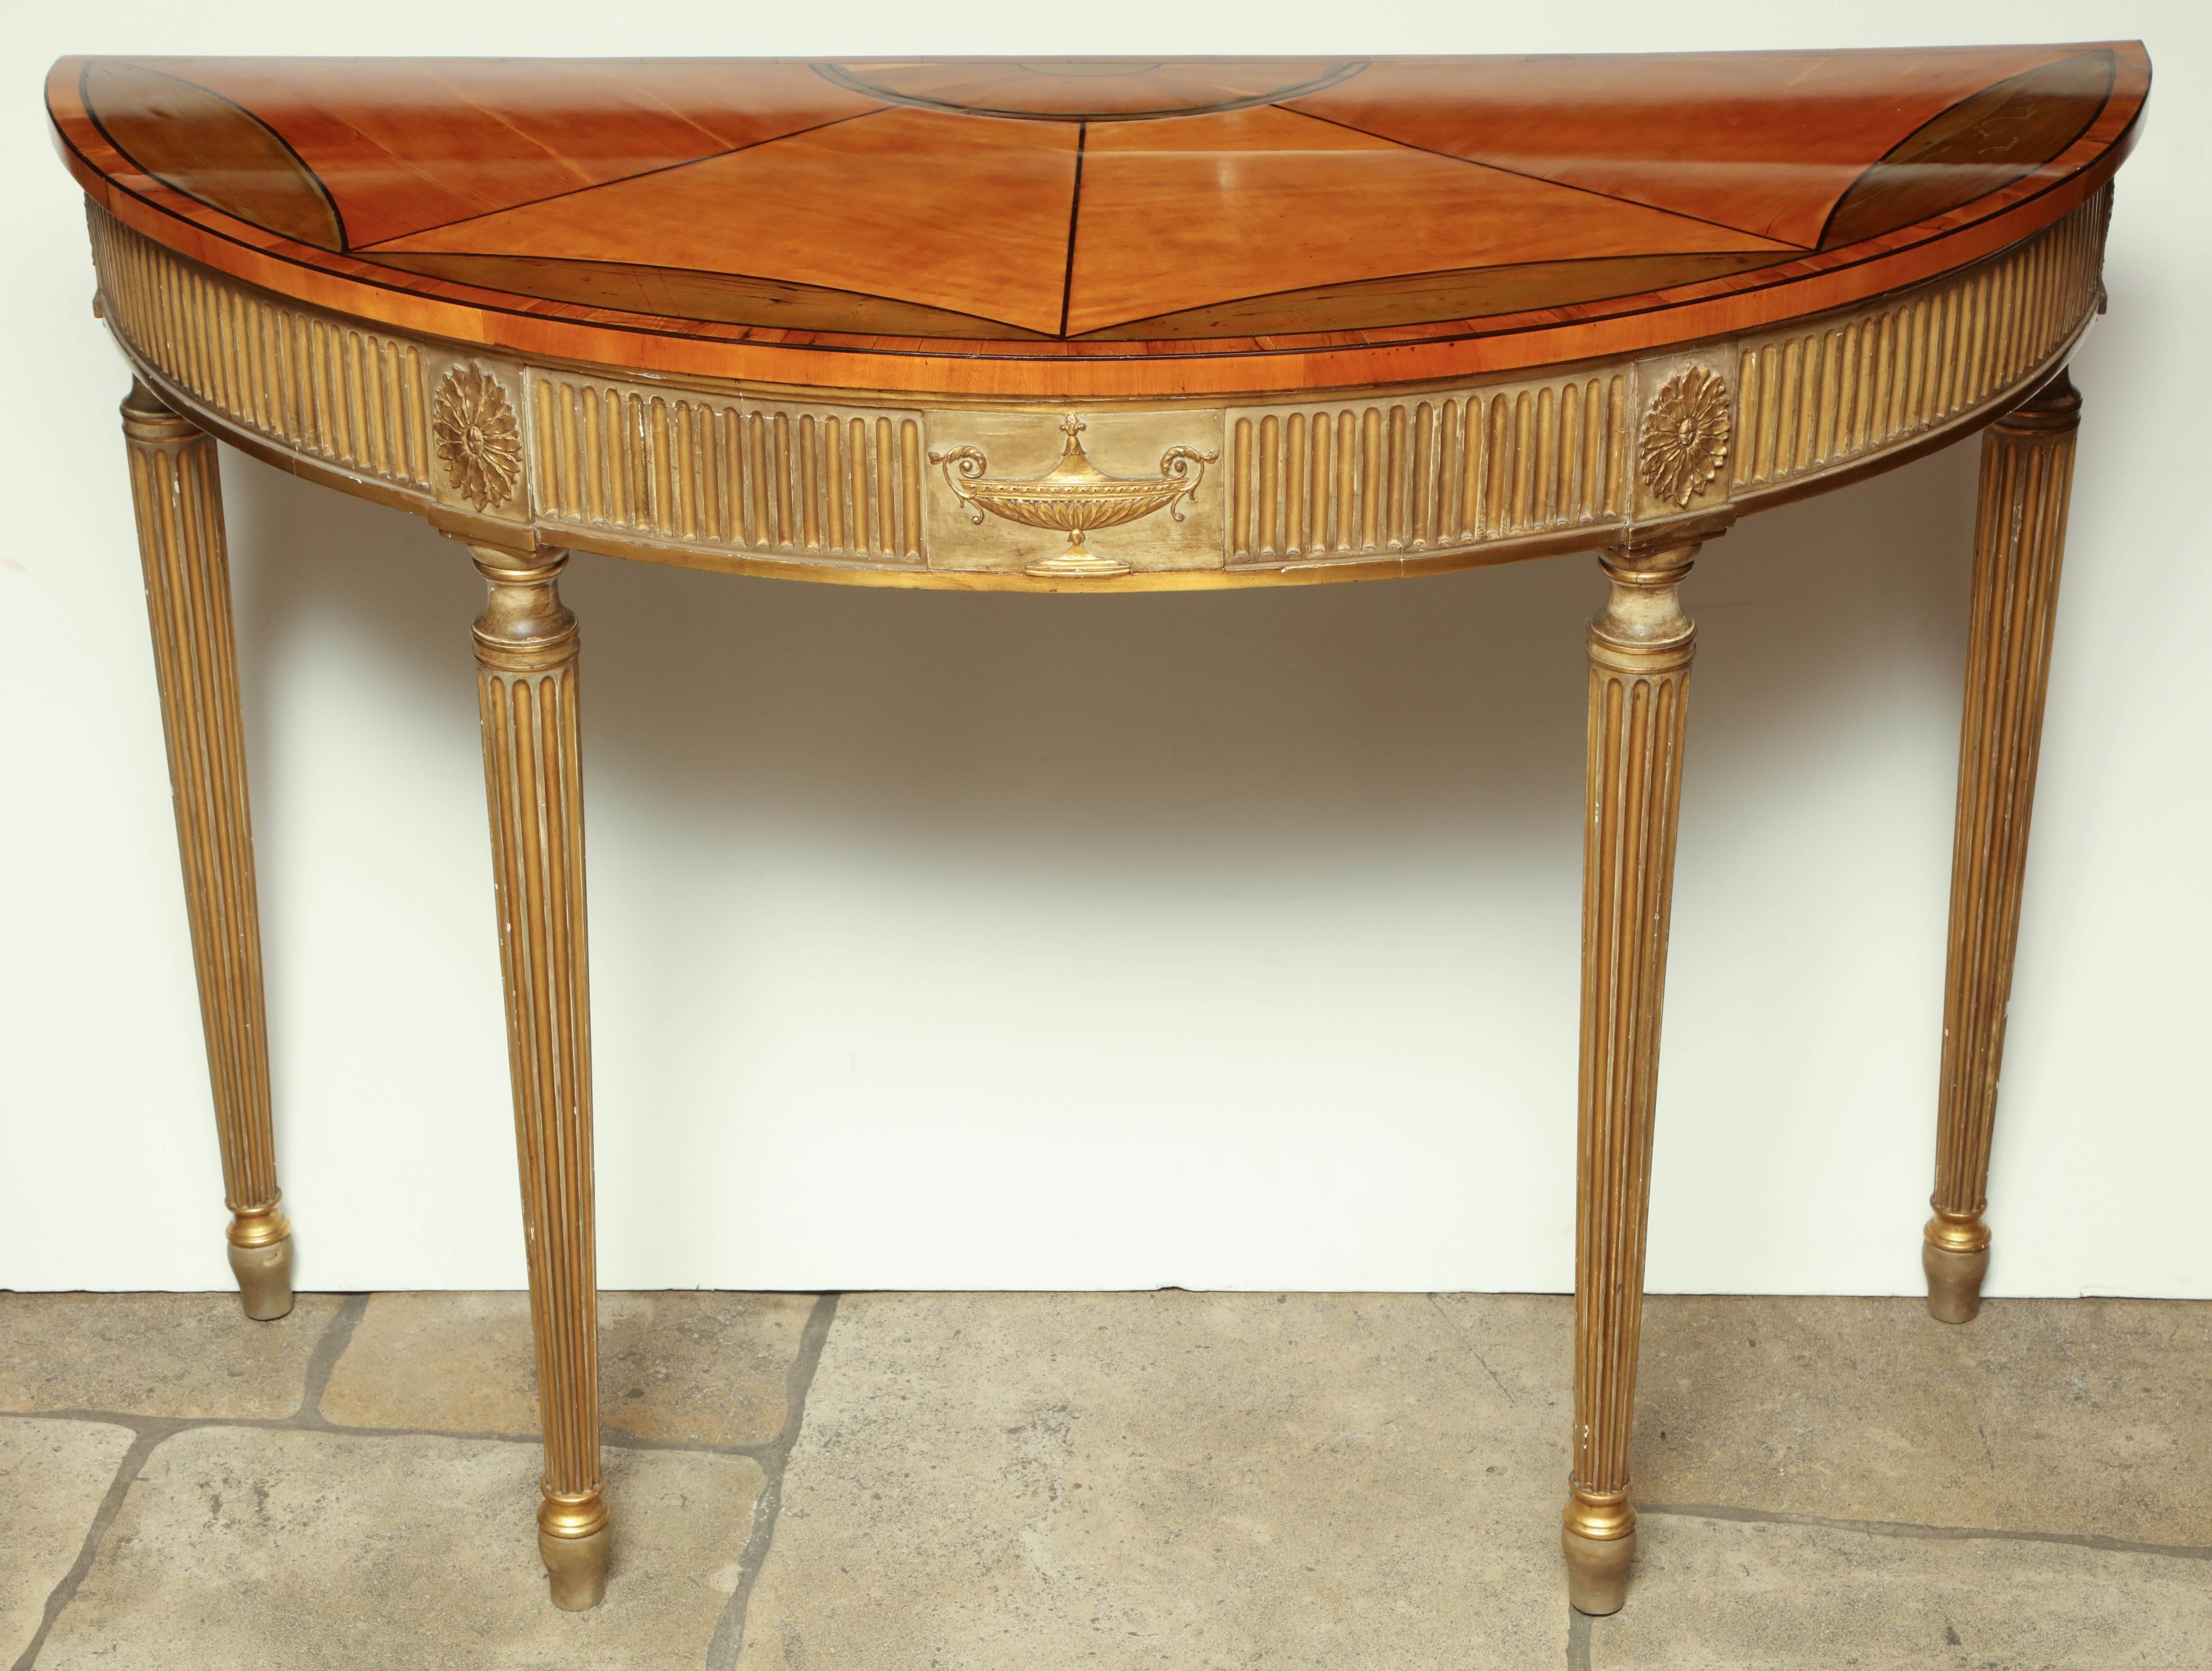 George III (Adam) satinwood and gilt demilune console with fan inlaid top and a fluted and gilt base.